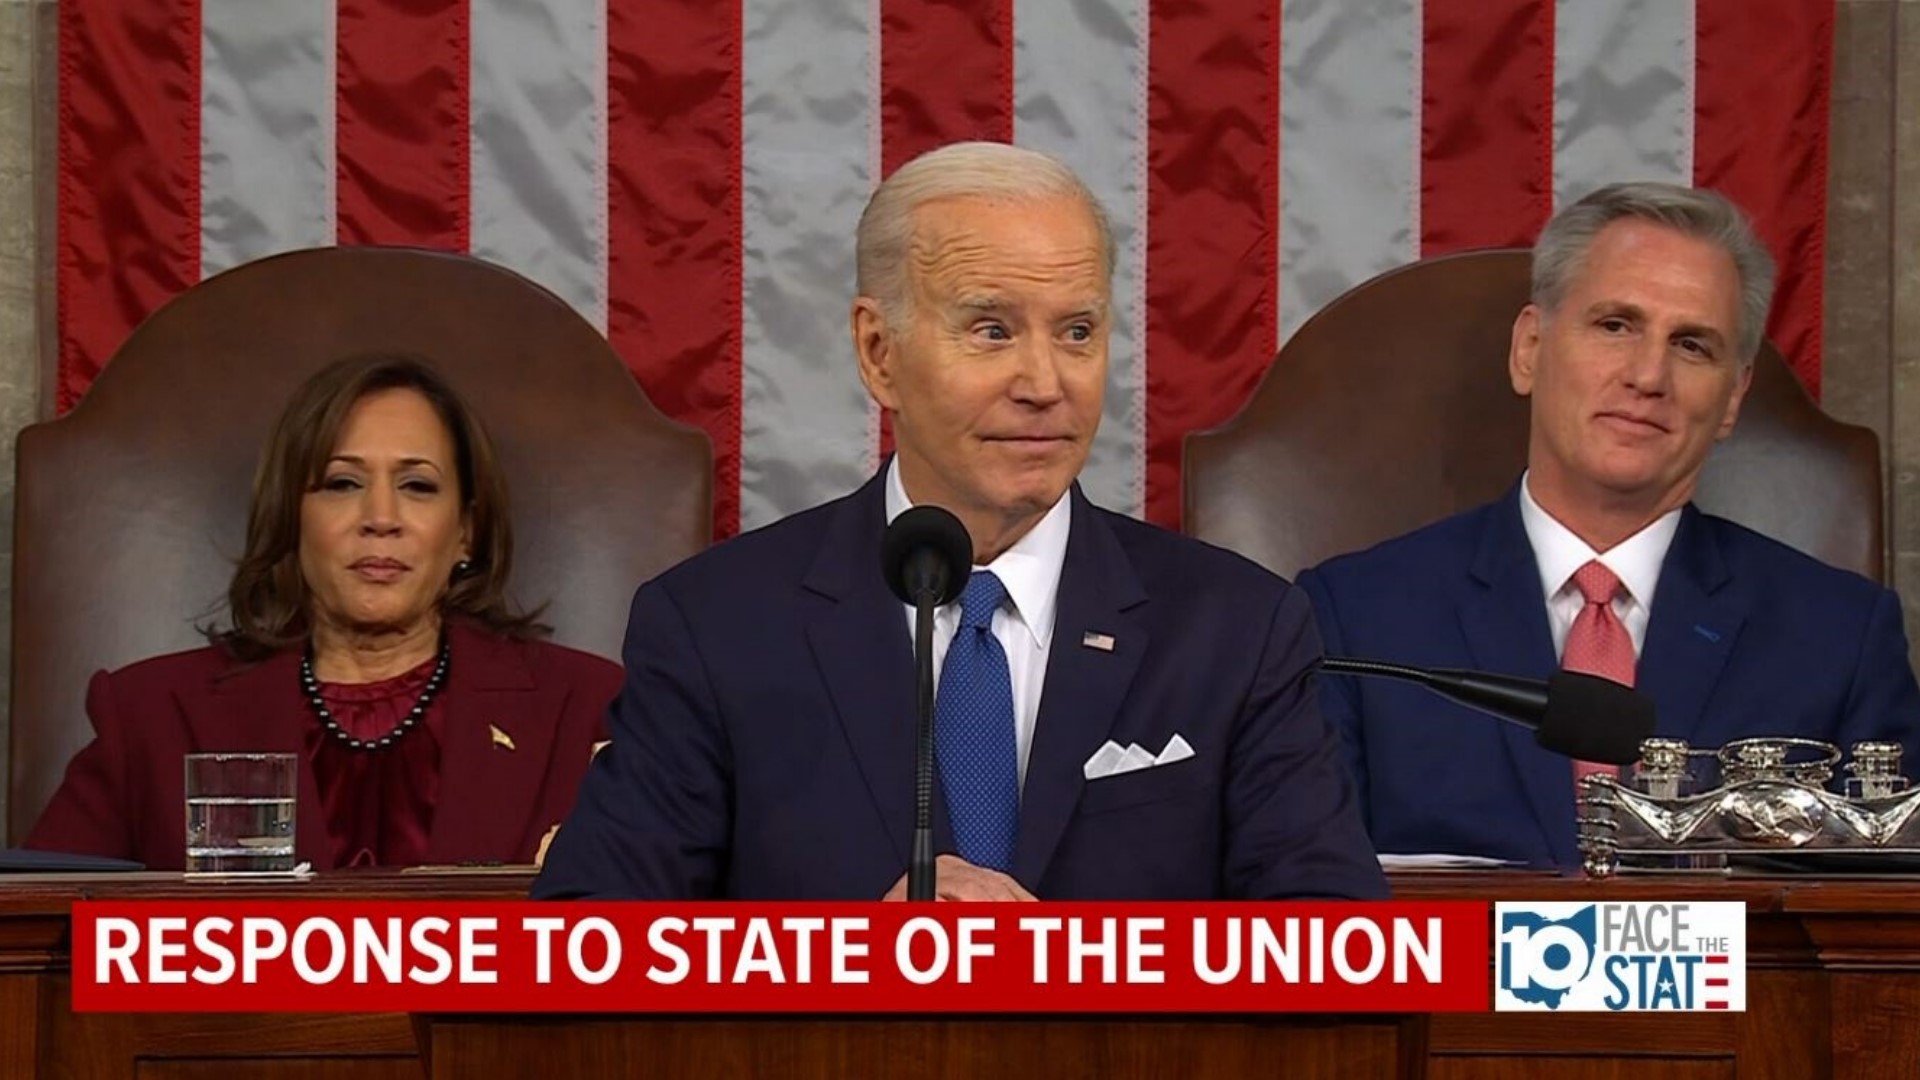 On this week's Face the State, we hear from Ohio lawmakers on their reactions to President Biden's State of the Union Address.